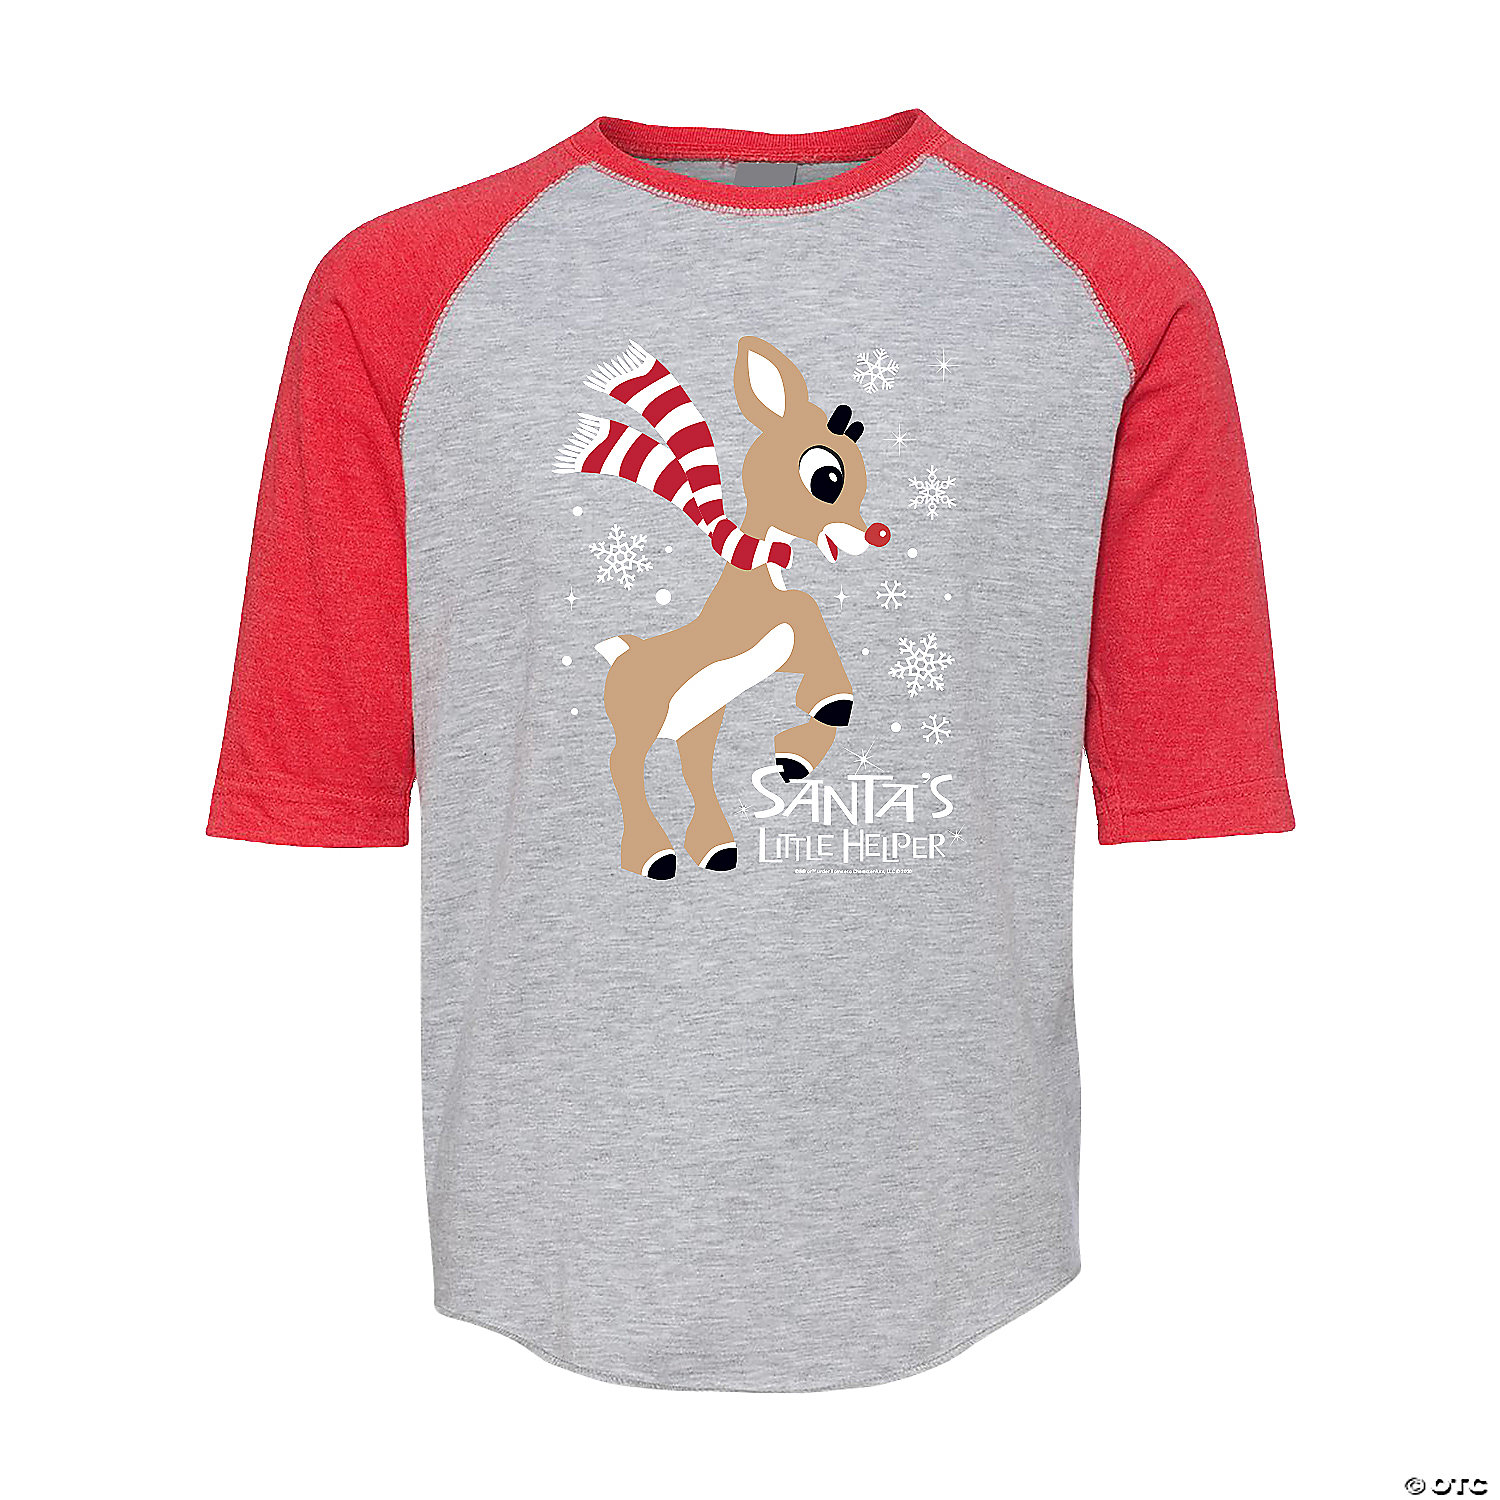 rudolph the red nosed reindeer t shirt